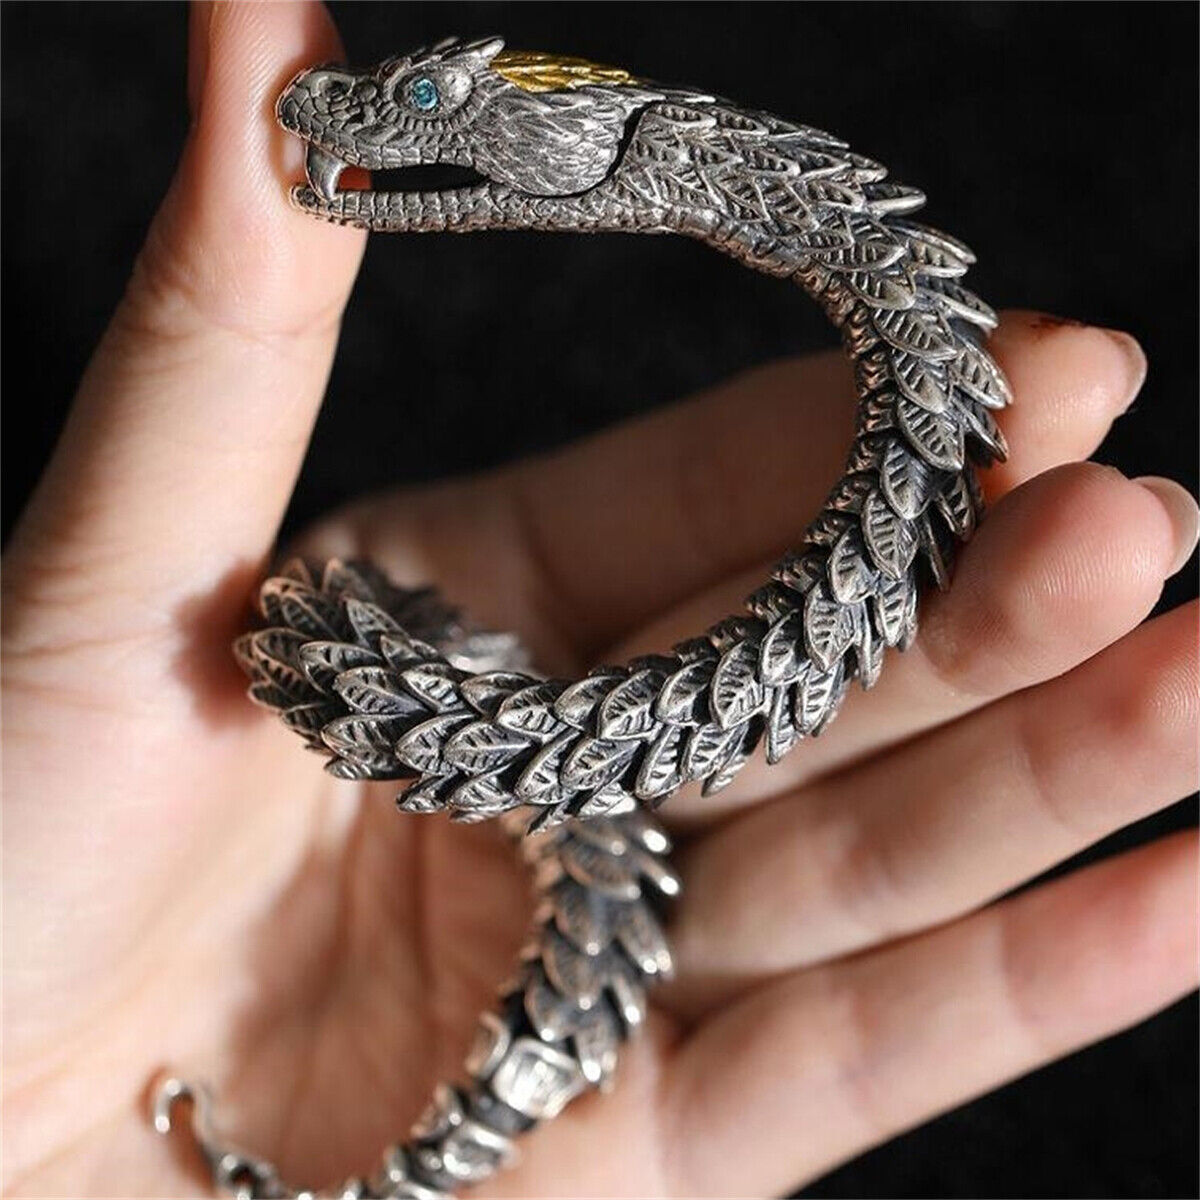 RARE PRINCE by CARAT SUTRA | Unique Golden Head Oxidized Snake Bracelet with Blue Eyes | 925 Sterling Silver Oxidized Bracelet | Unisex Jewelry | With Certificate of Authenticity and 925 Hallmark